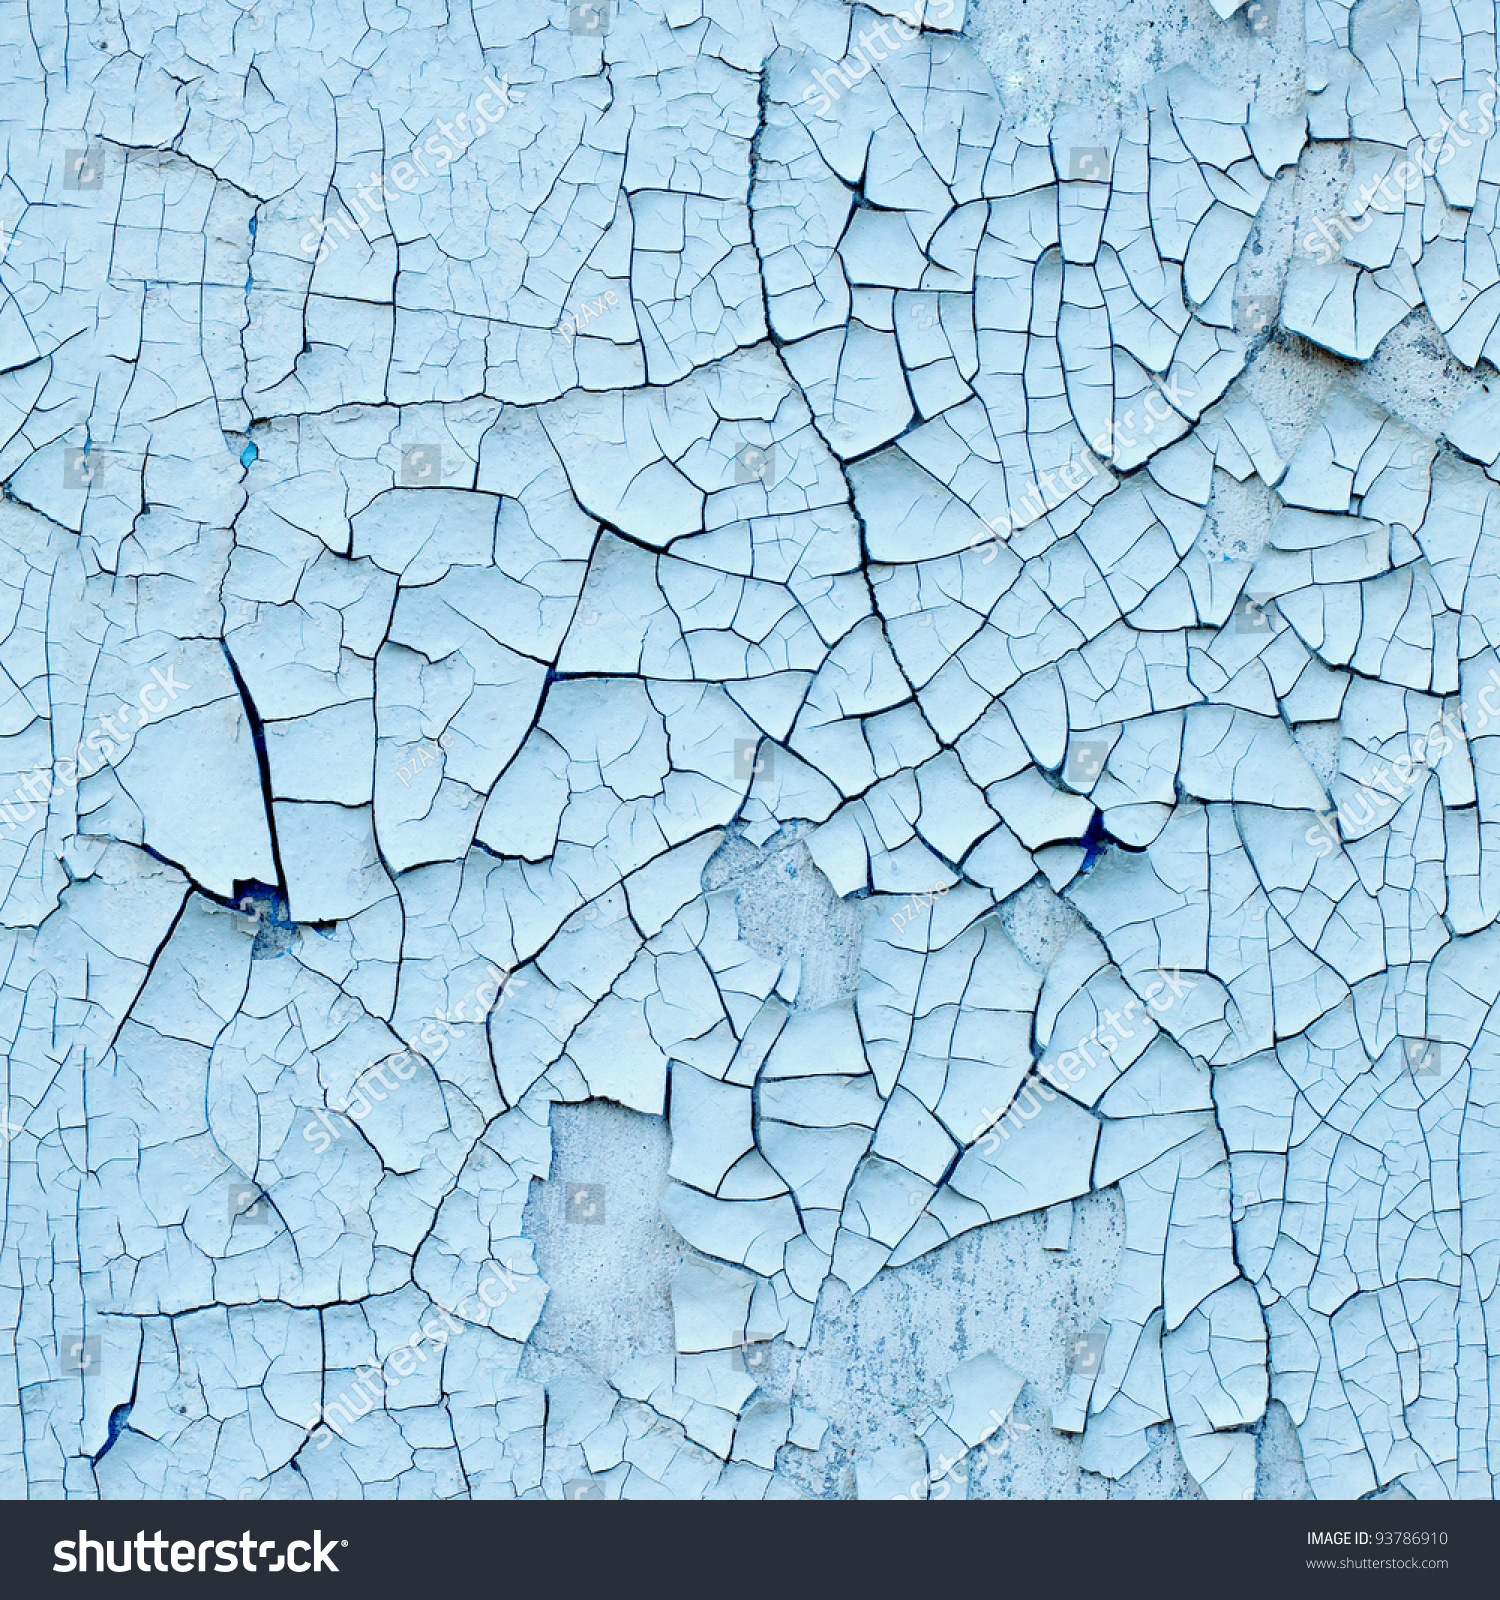 Royalty-free Peeling paint on wall seamless texture.… #93786910 ...